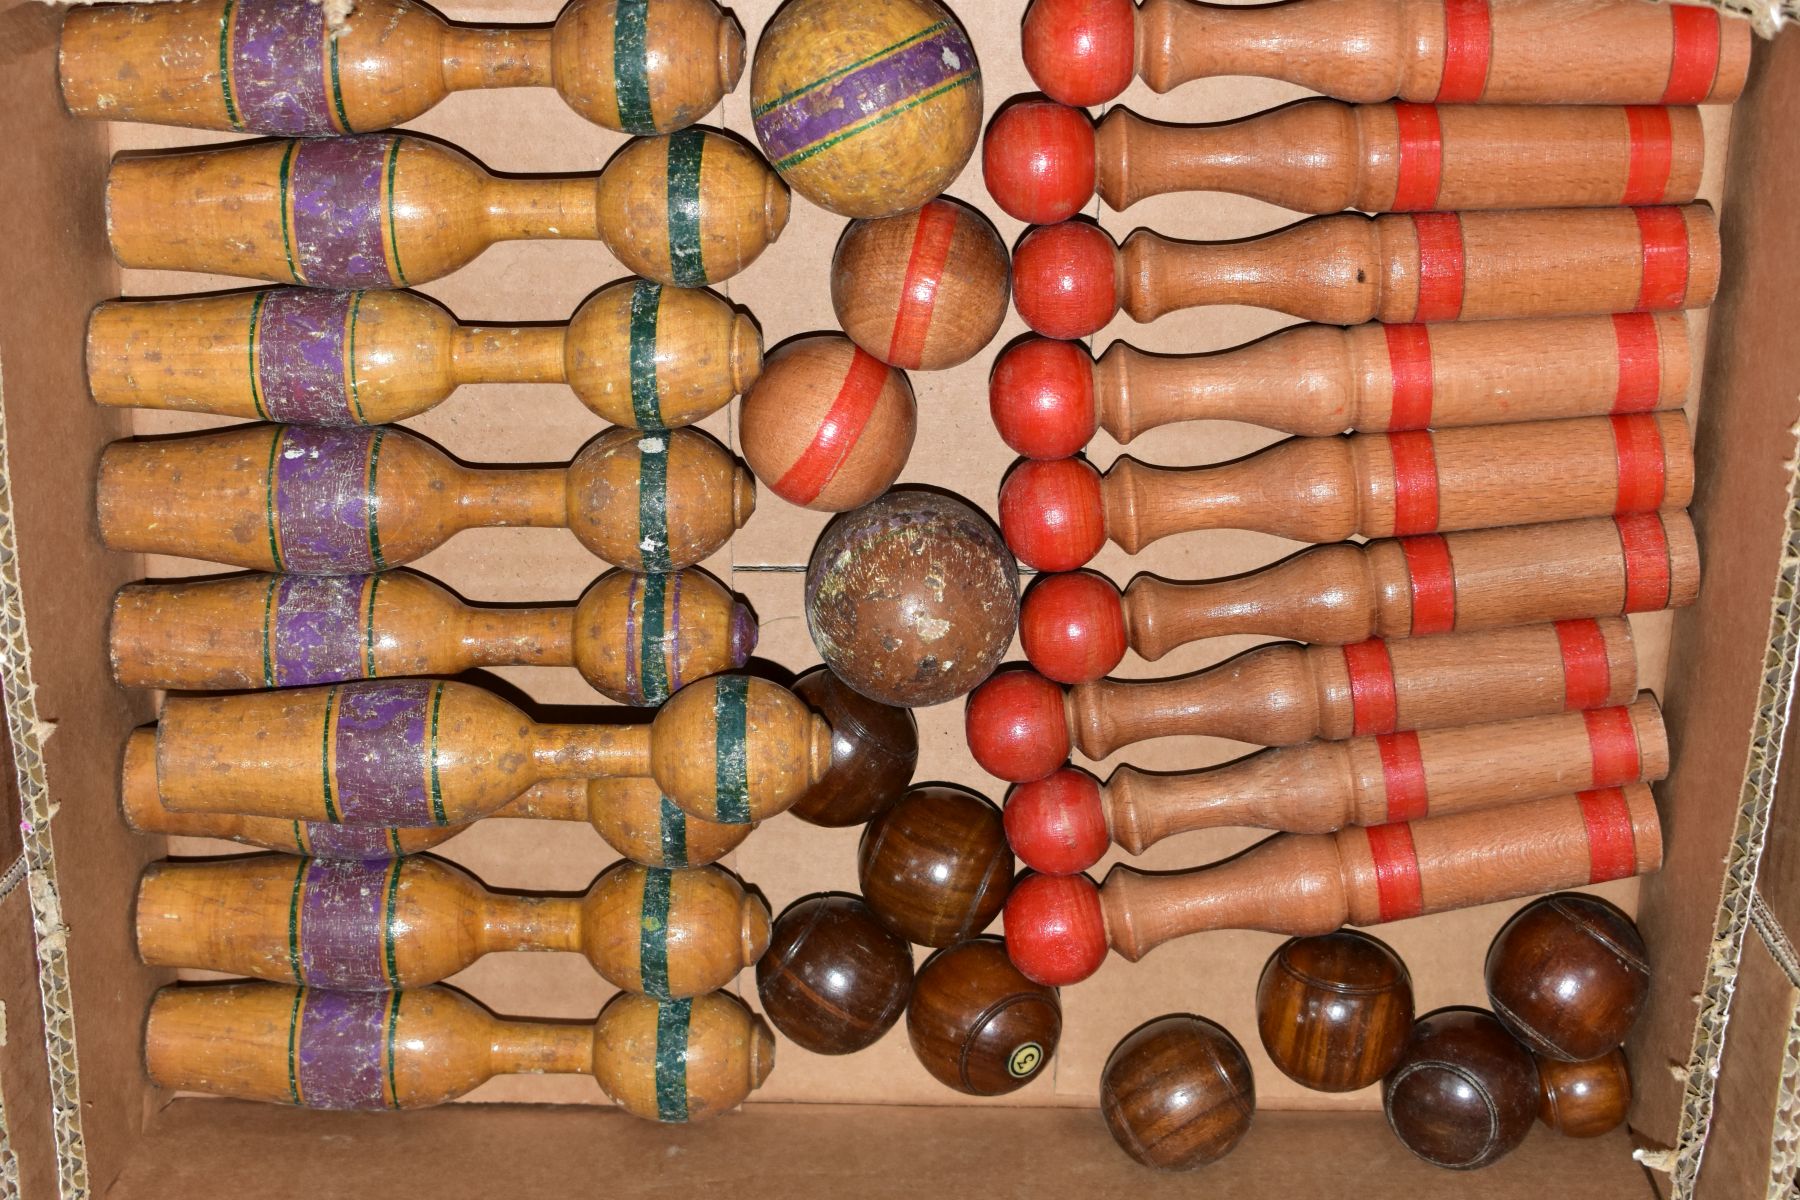 TWO UNBOXED SETS OF INDOOR WOODEN SKITTLES AND BALLS, playworn condition but both appear complete - Image 4 of 4